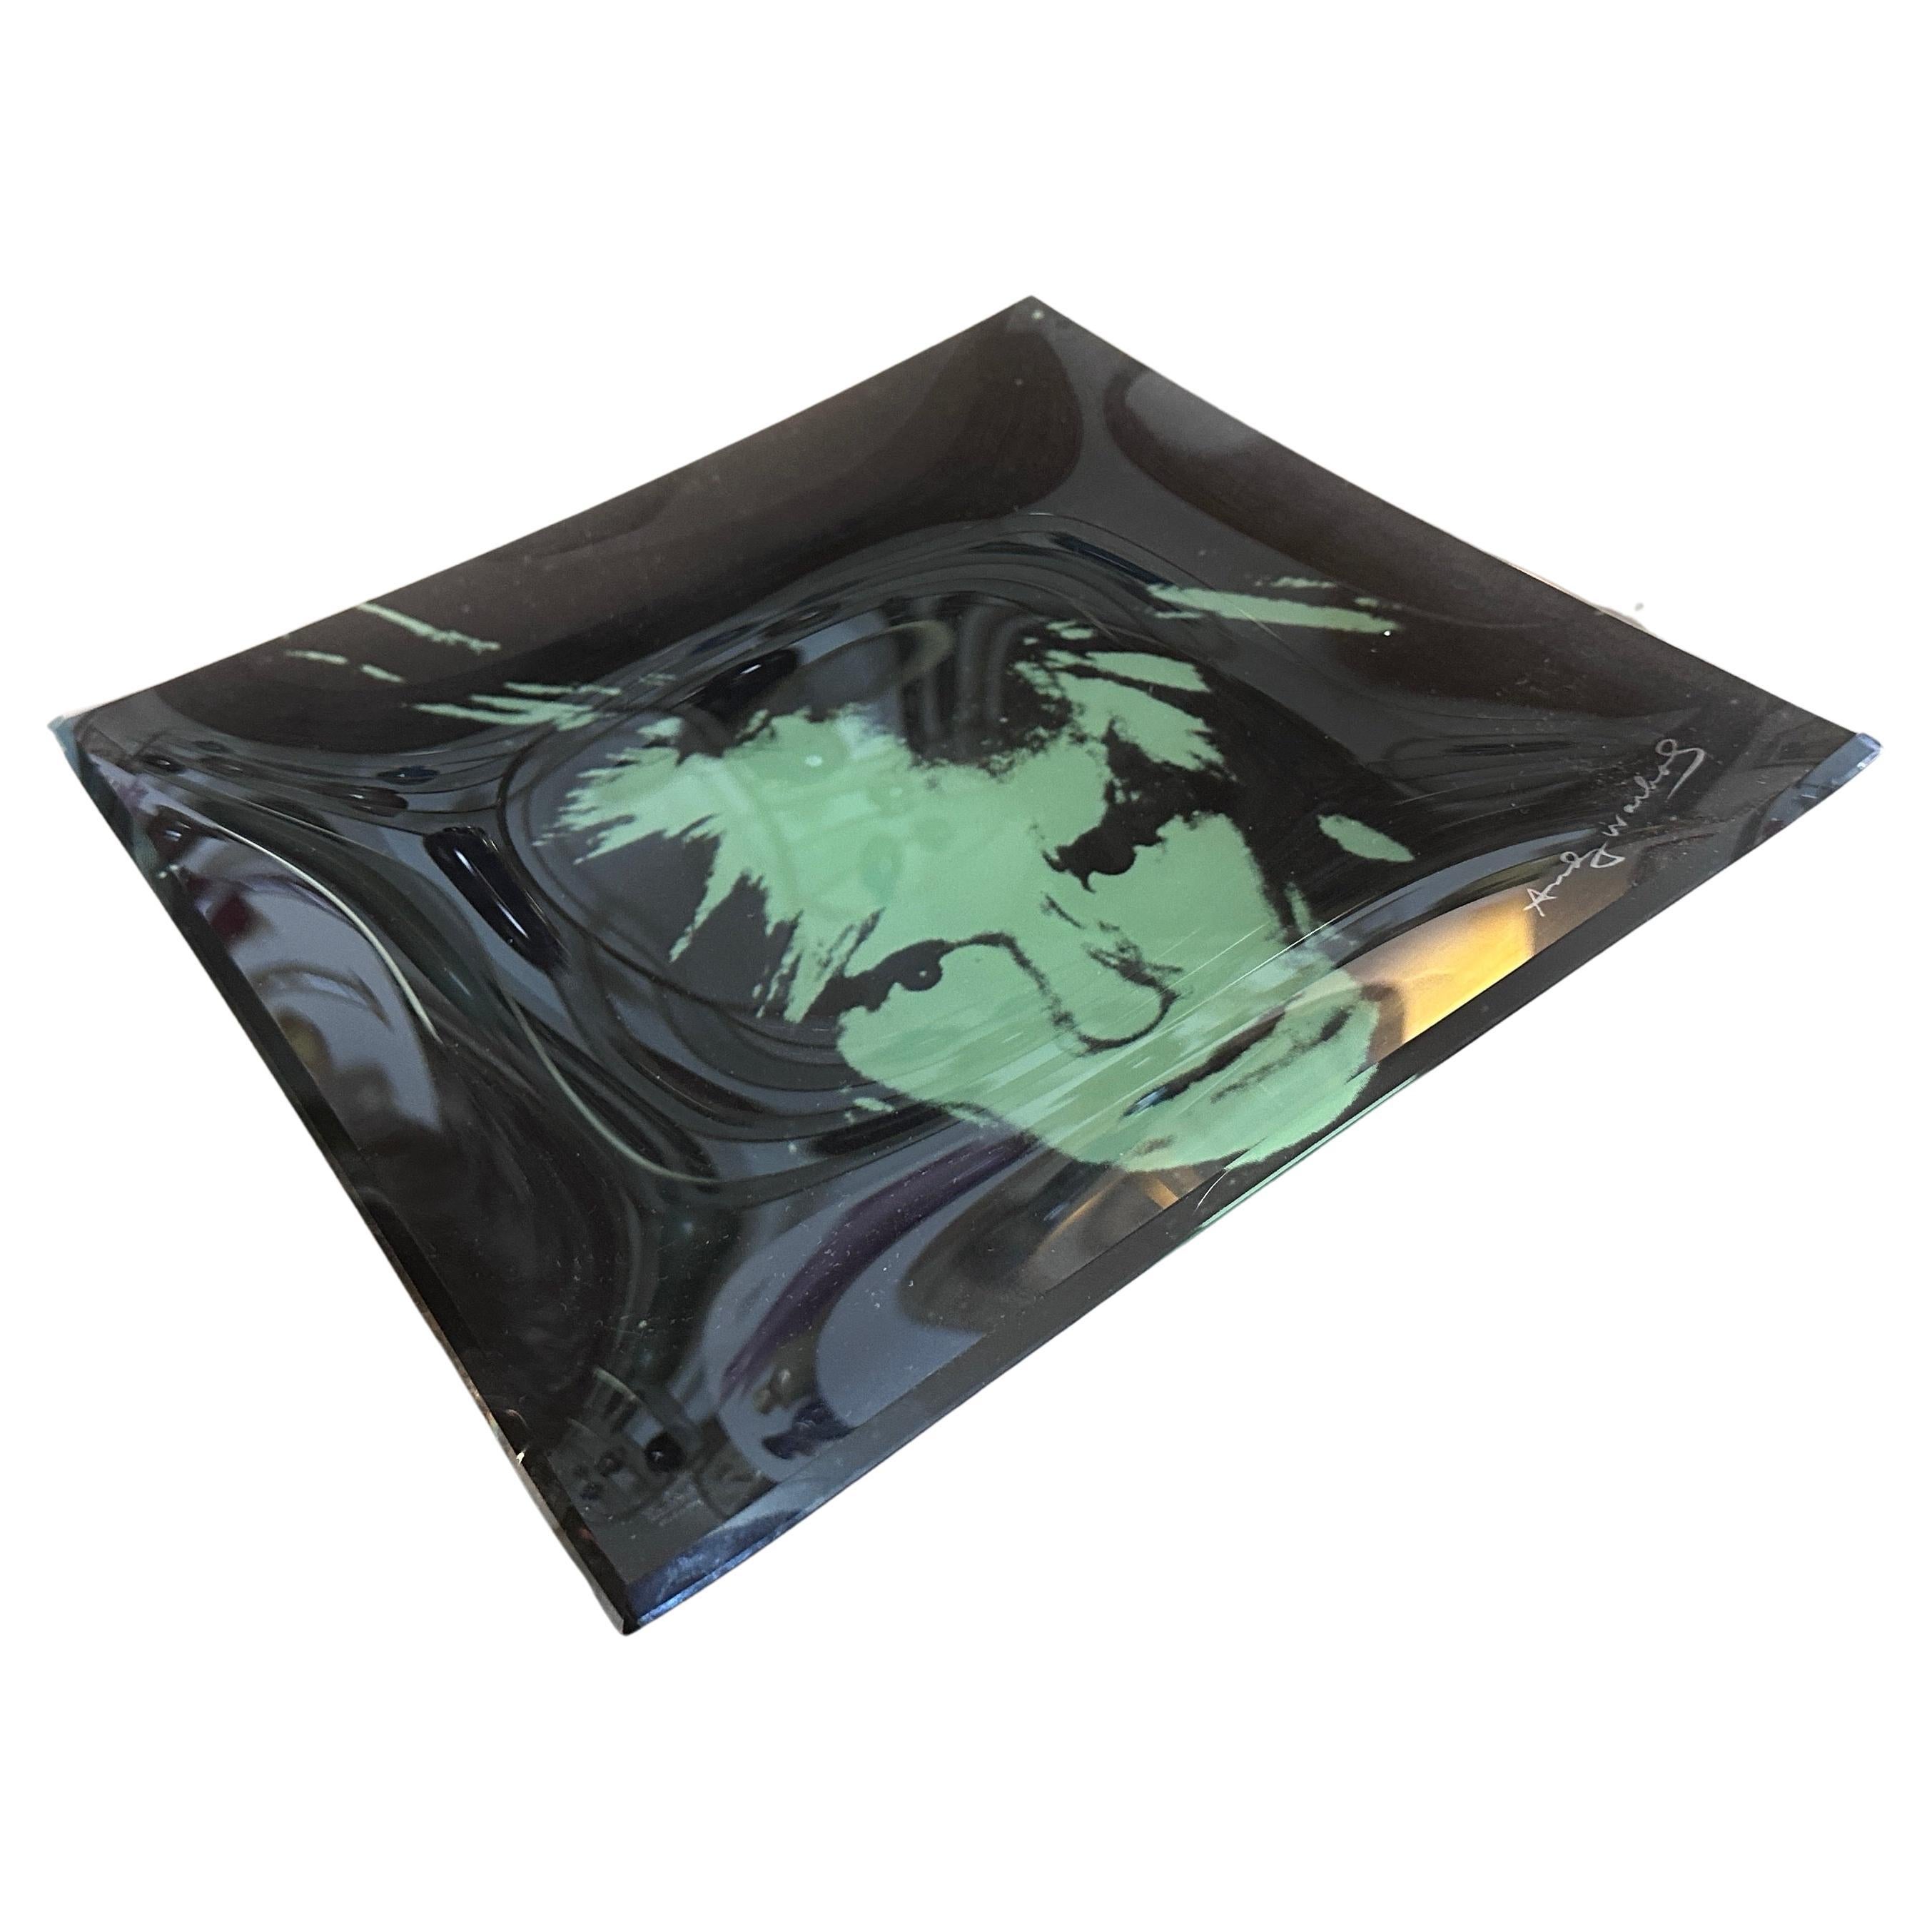 This Self portrait Curved Glass Tray, designed by the iconic artist Andy Warhol, epitomizes the spirit of the era's vibrant and bold artistic movement. Blending Warhol's distinctive style with functional design, this glass tray serves as both a